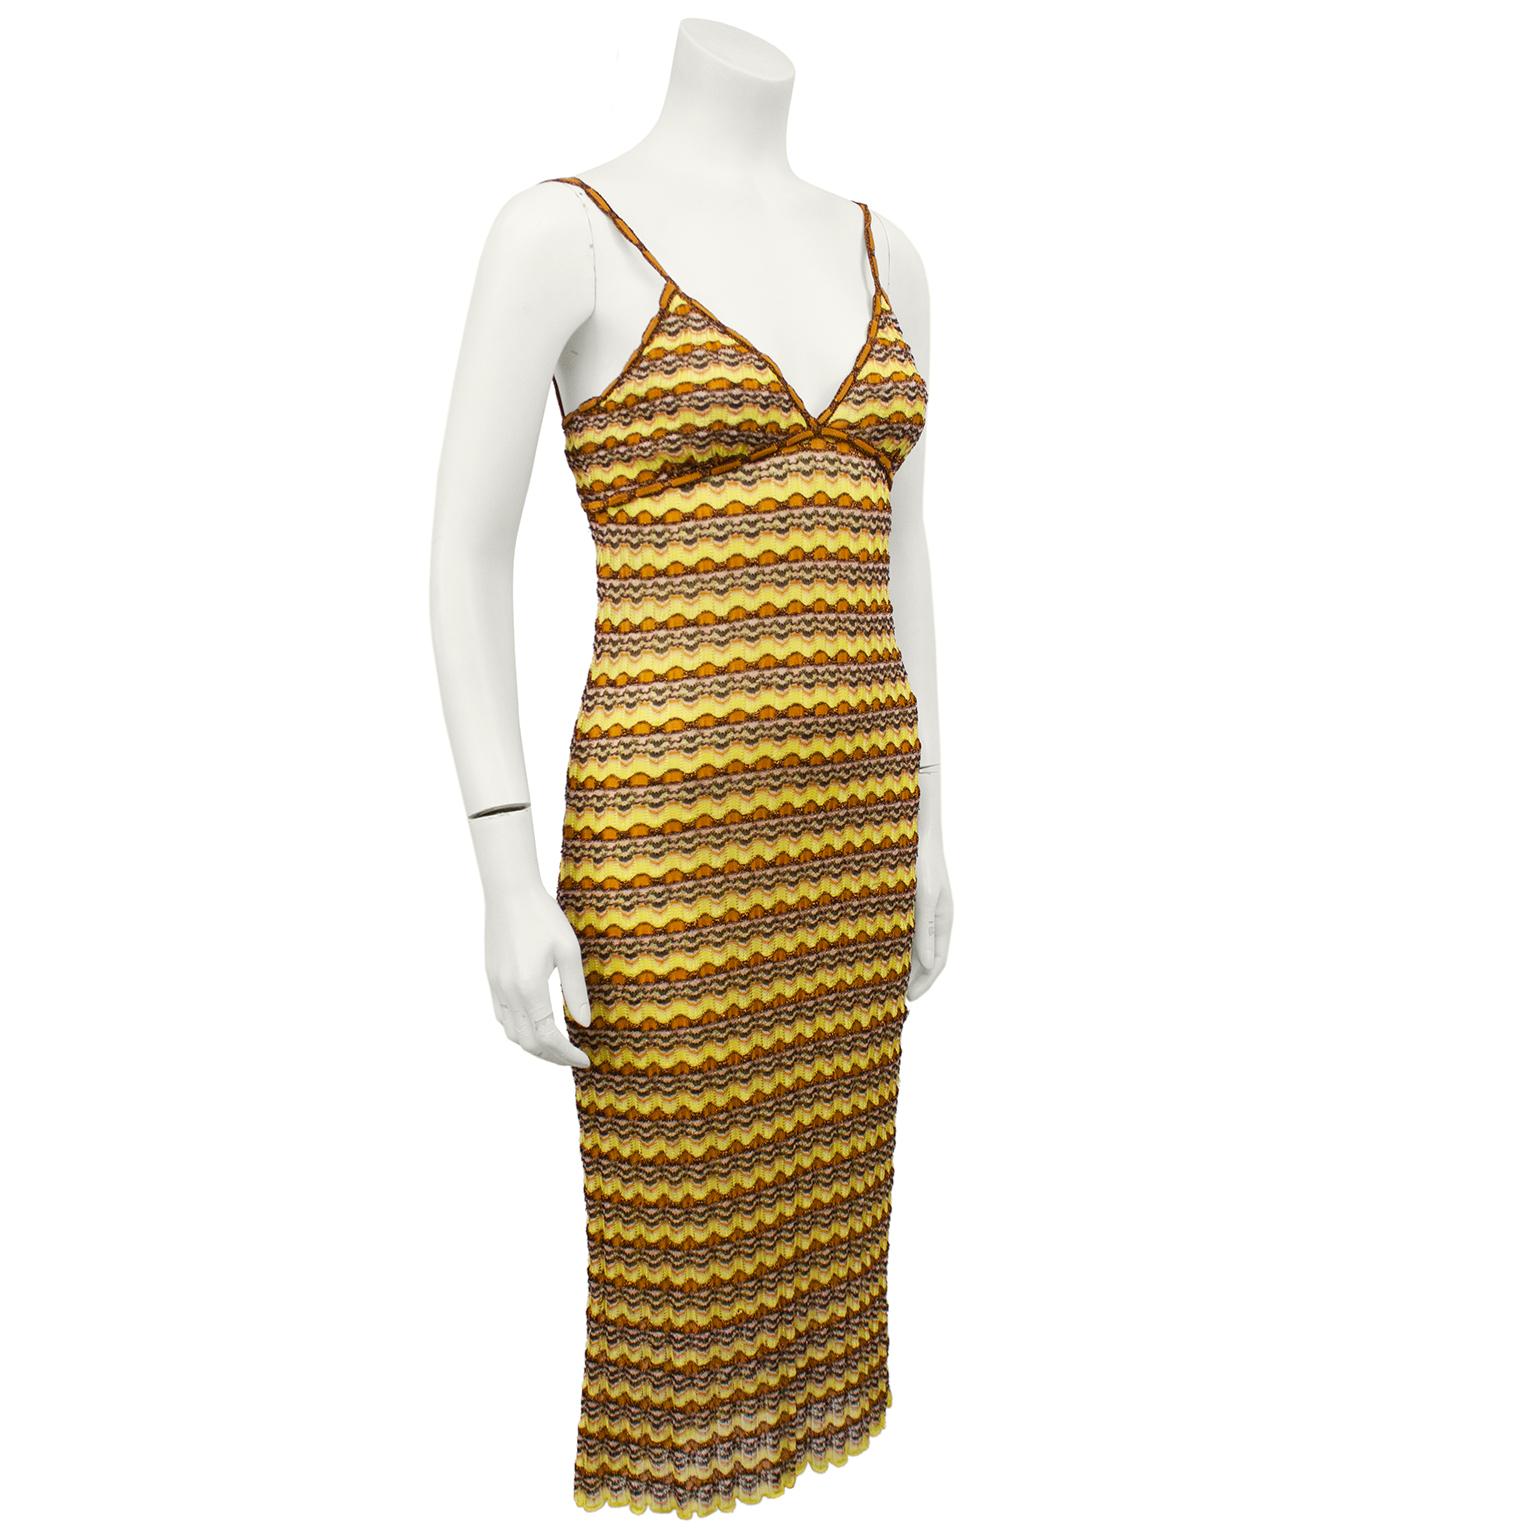 1990's Missoni yellow and brown knit eyelet dress. The iconic and instantly recognizable Missoni knit chevron/scallop. Spaghetti straps with tan and brown metallic trim that mimics a weaved draw string. V neckline. Body con and slightly sheer.